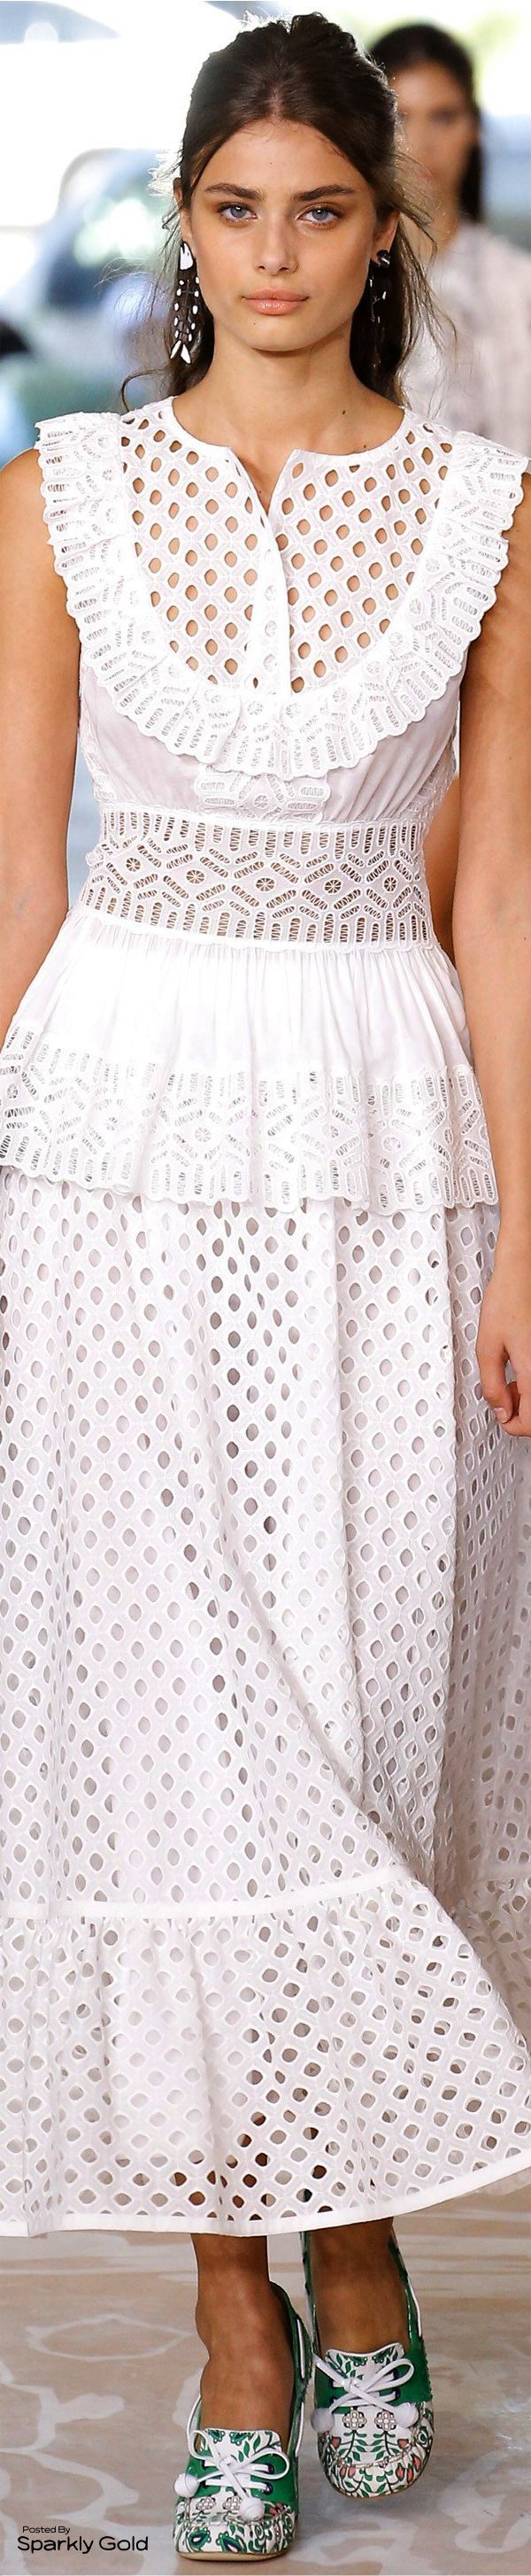 I don’t normally like Tory Burch, but the shape of this dress looks like it would be very flattering and cute.